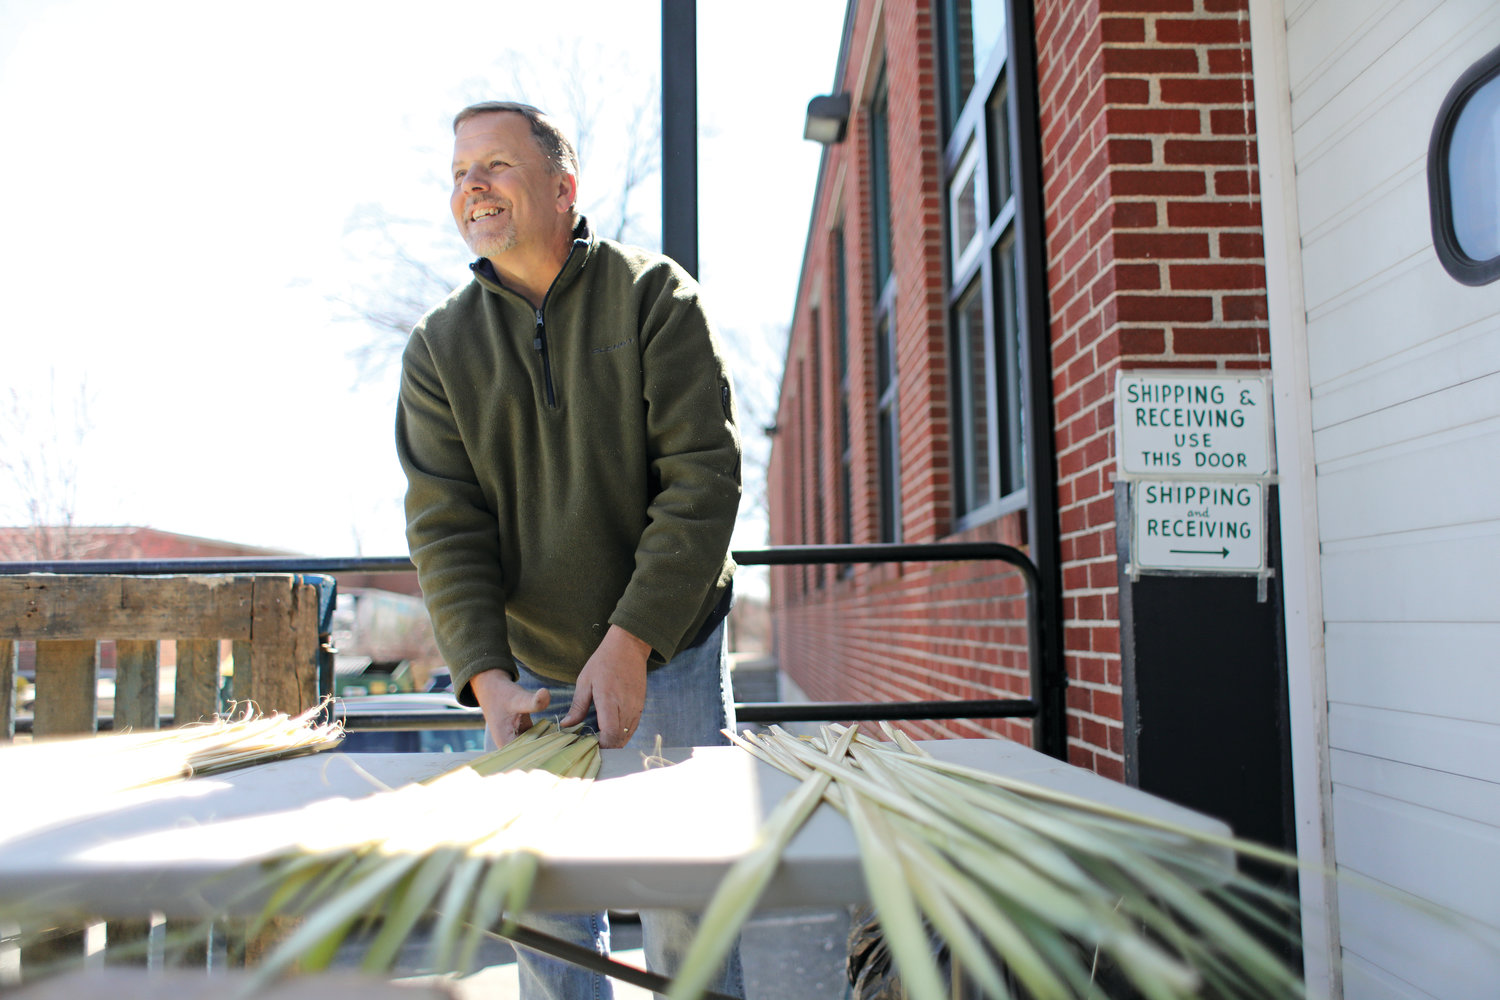 Tom Tally works hard preparing palms as Holy Week quickly approaches
in the Diocese of Providence.